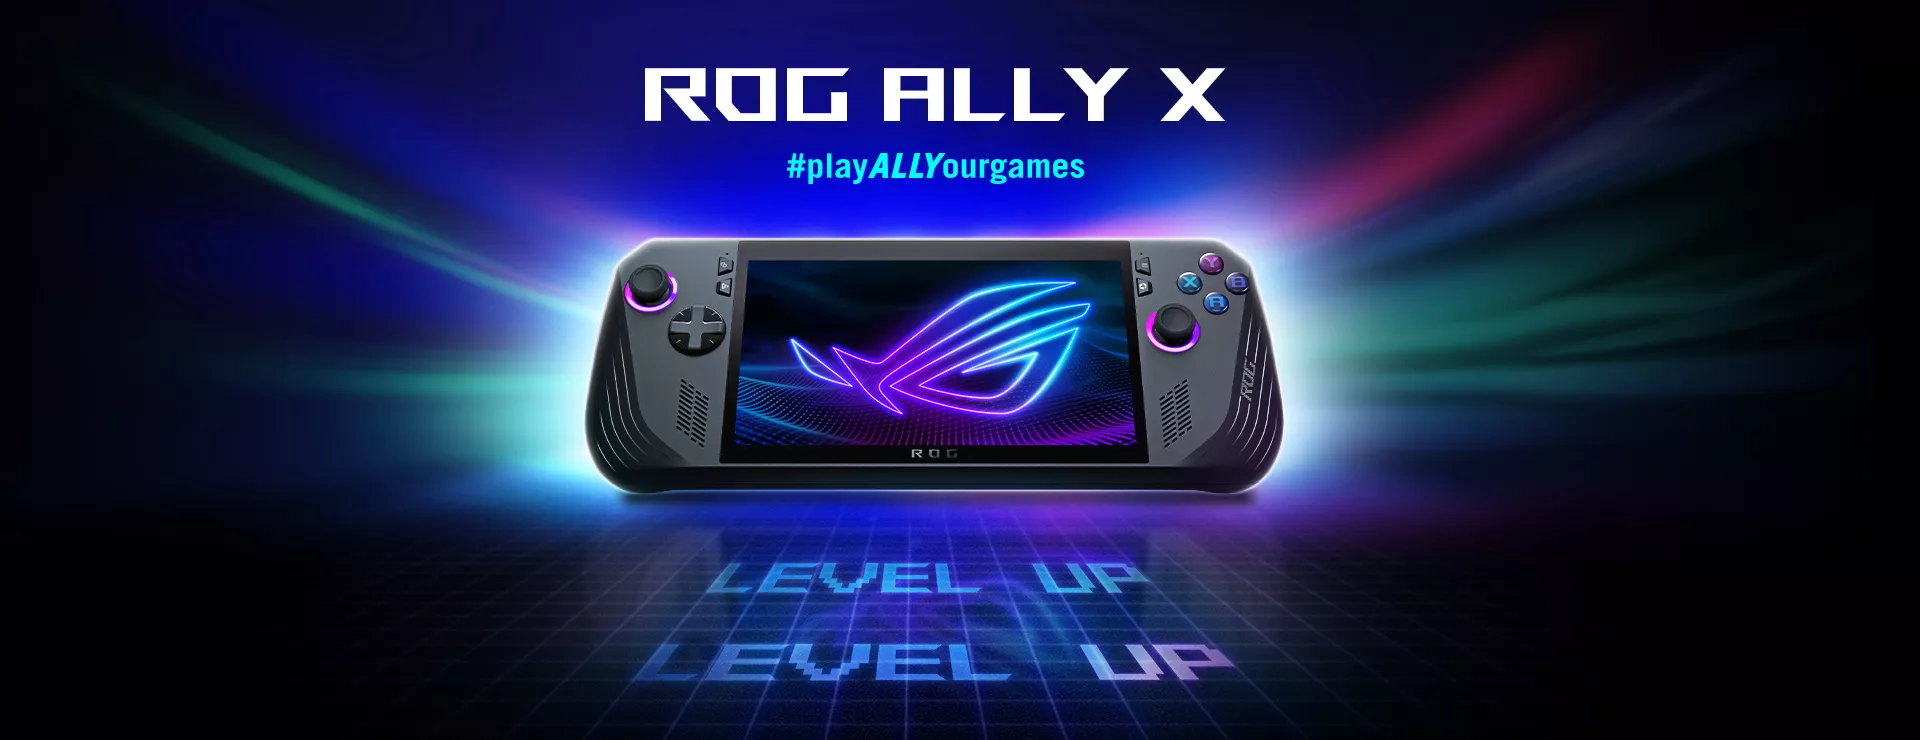 ROG Ally X gaming handheld illuminated with colorful lights and 'LEVEL UP' text on a digital grid background.